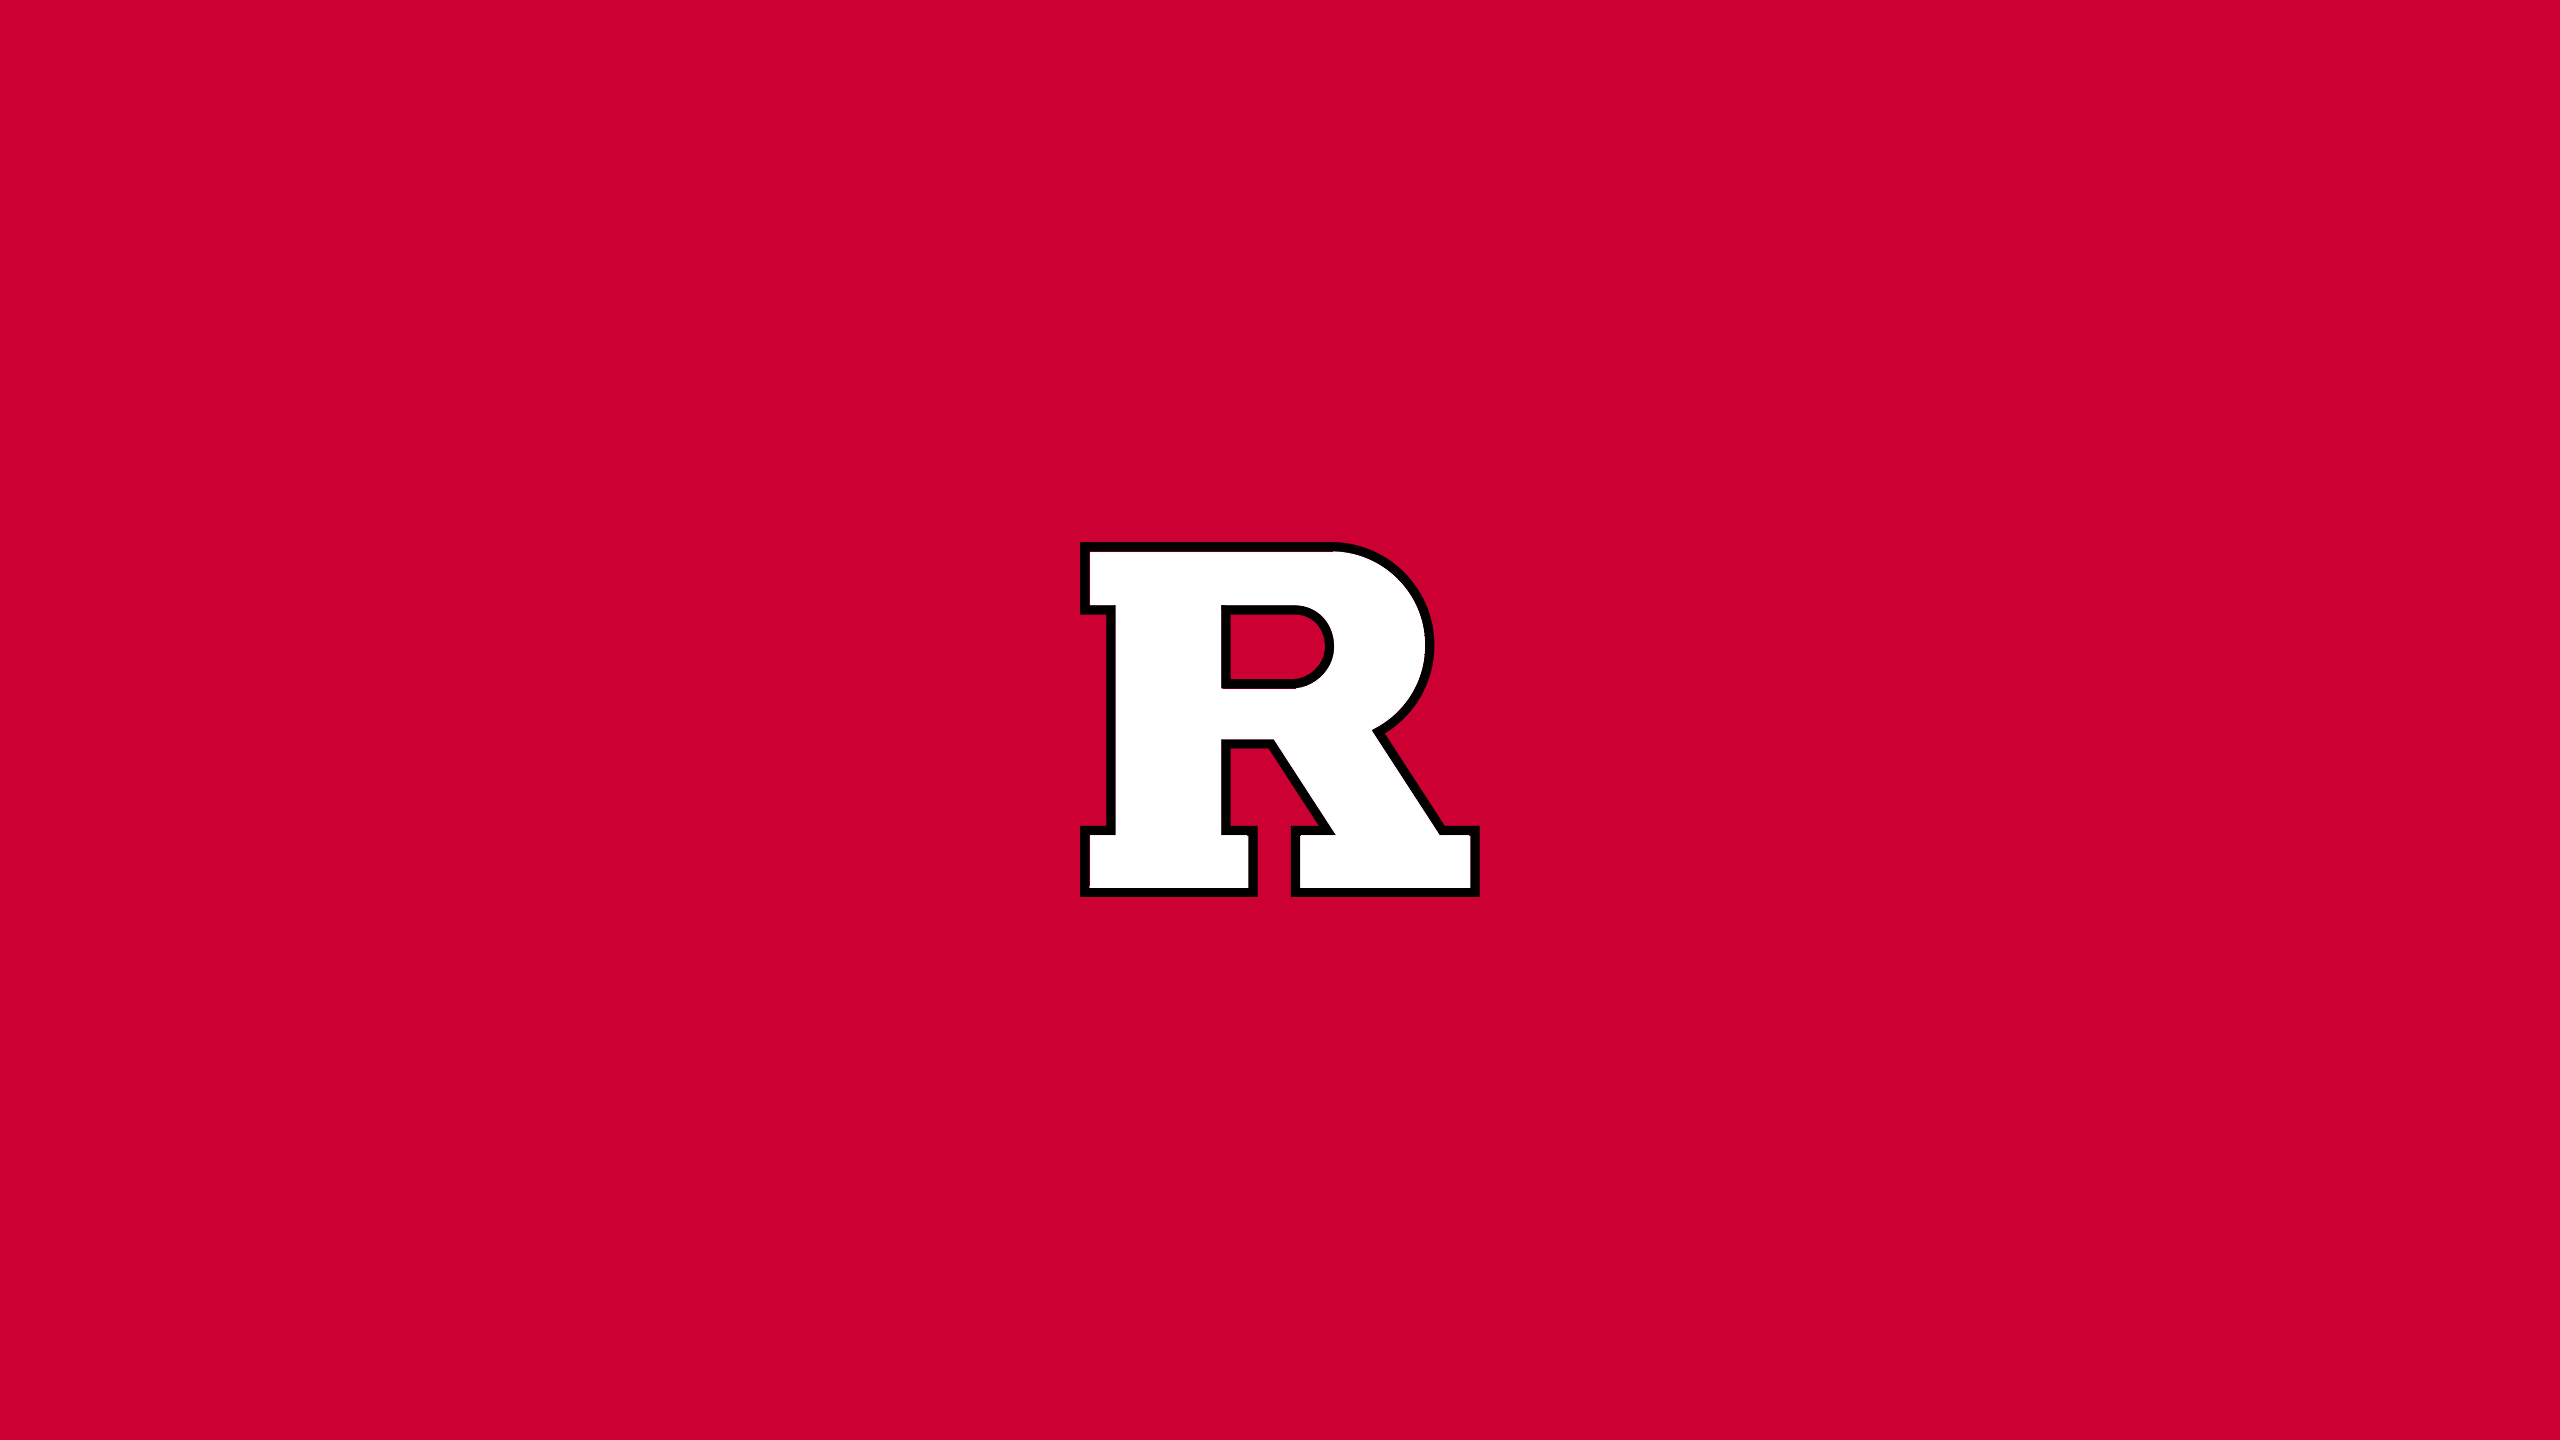 Rutgers Scarlet Knights Basketball - NCAAB - Square Bettor